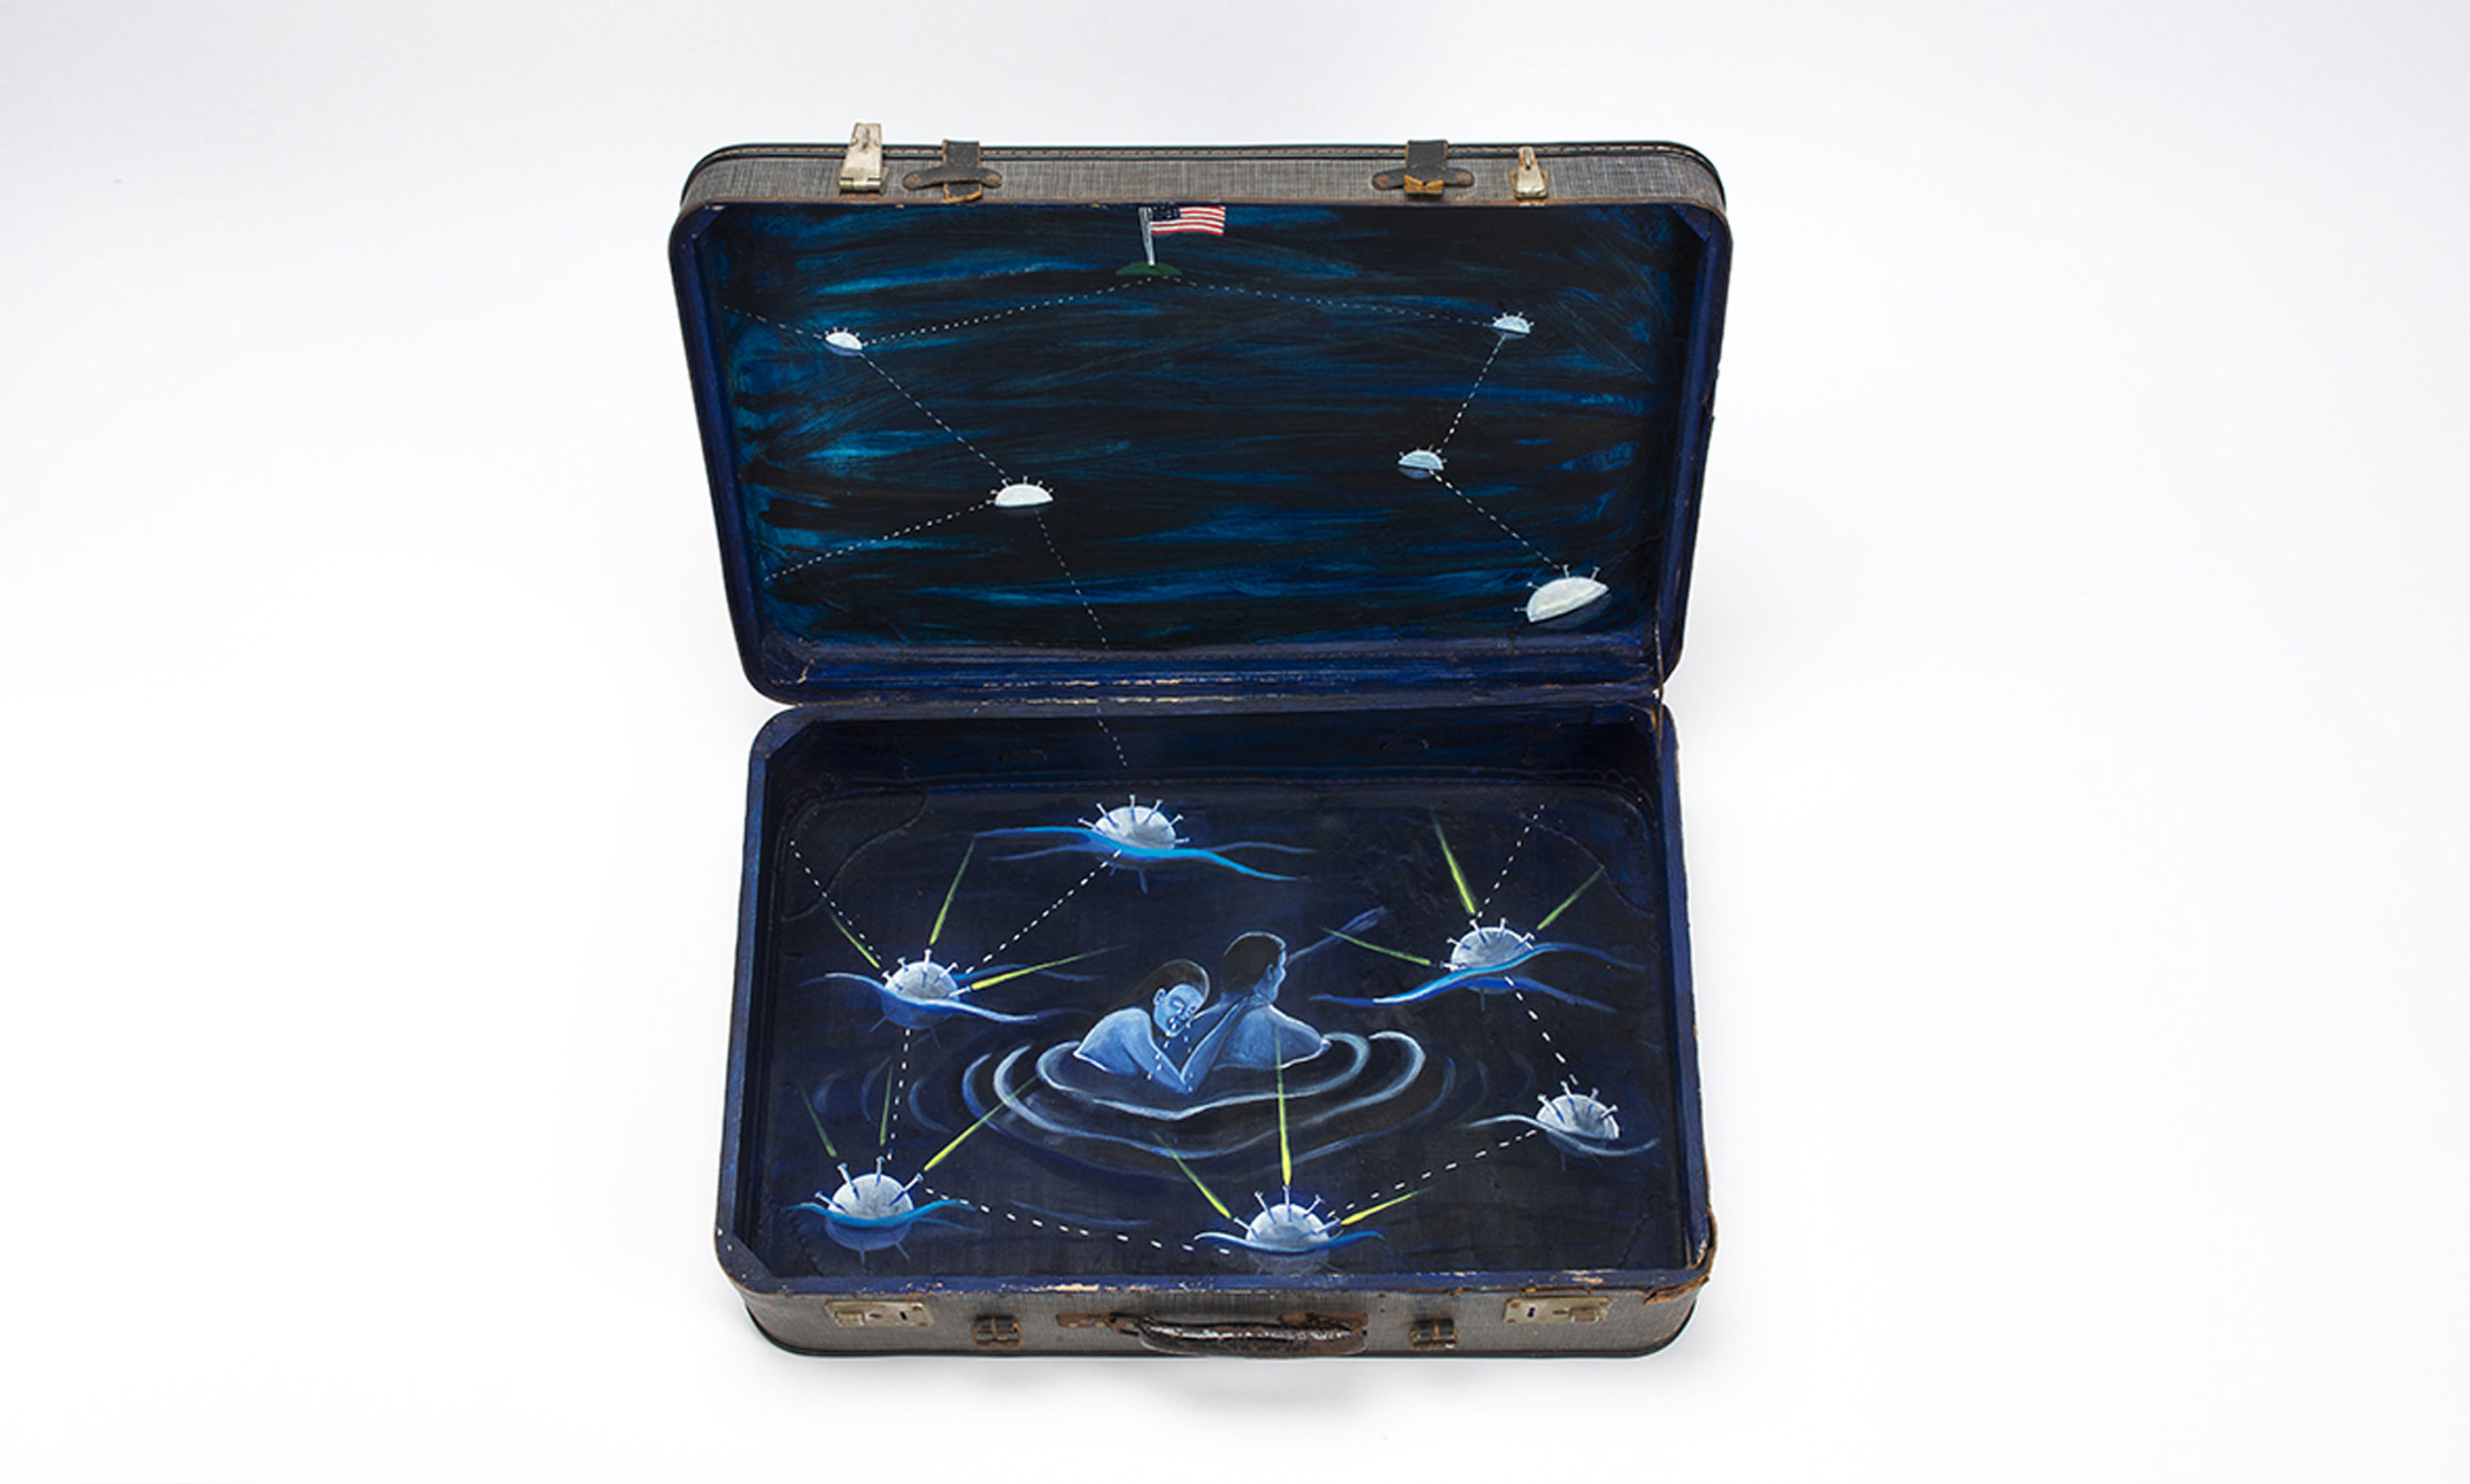 Sandra Ramos, From the Series Migrations II [Swimming under the Stars], 1994. Oil on suitcase. Collection of ASU Art Museum. Gift of the ASU Art Museum Advisory Board 100% +Cuban Campaign. Photography by Craig Smith.